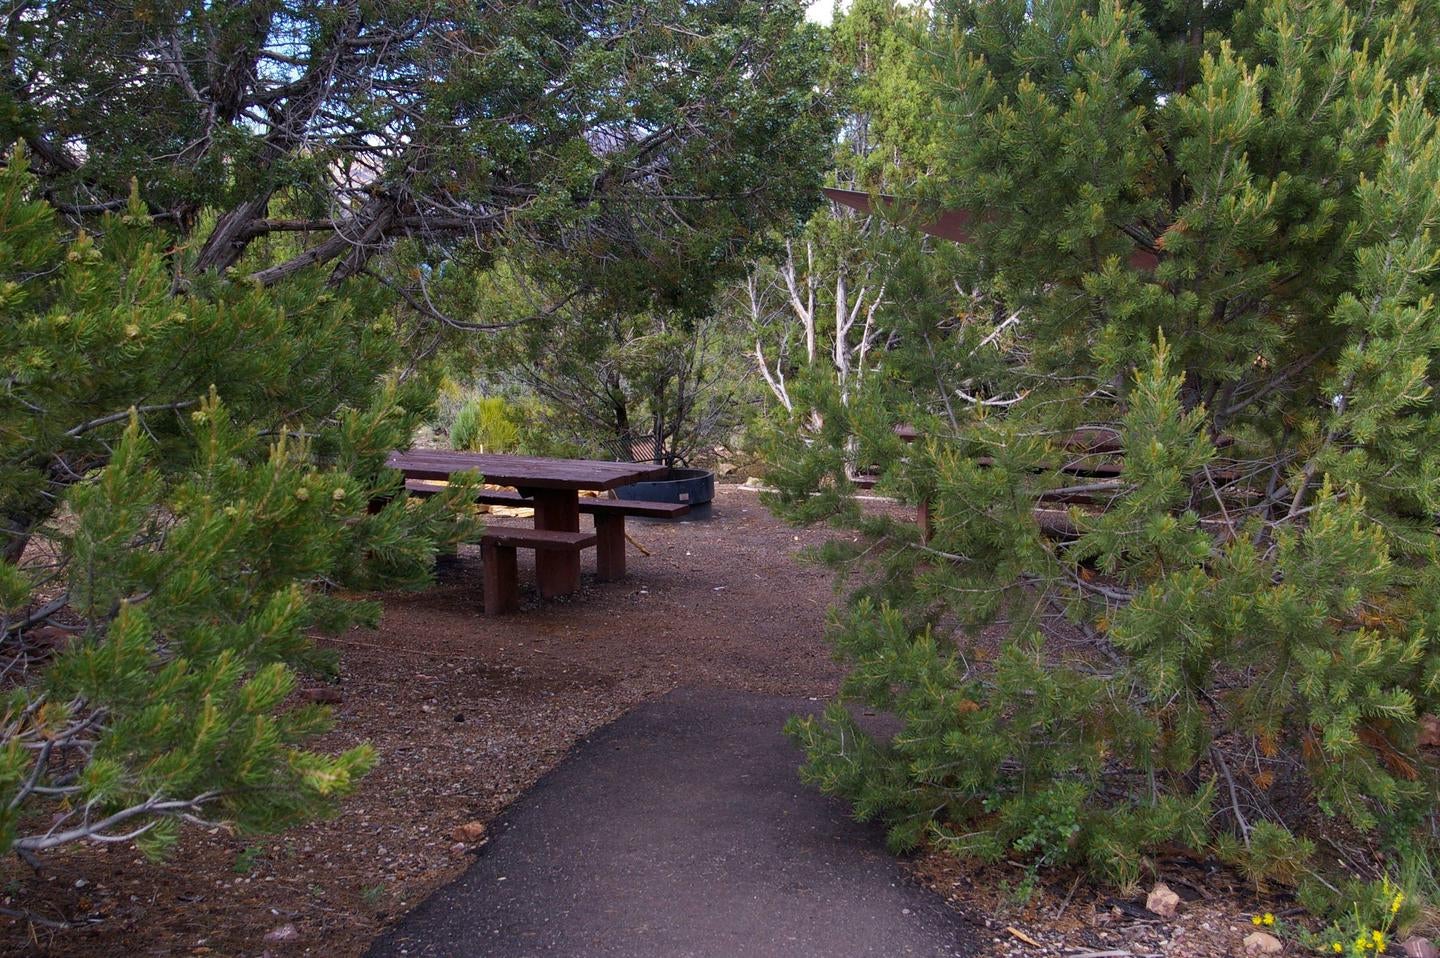 Picnic table tuck away in the middle of a group of trees. An asphalt path leads up to the area.



Cedar Springs Campground

Credit: U.S. Forest Service